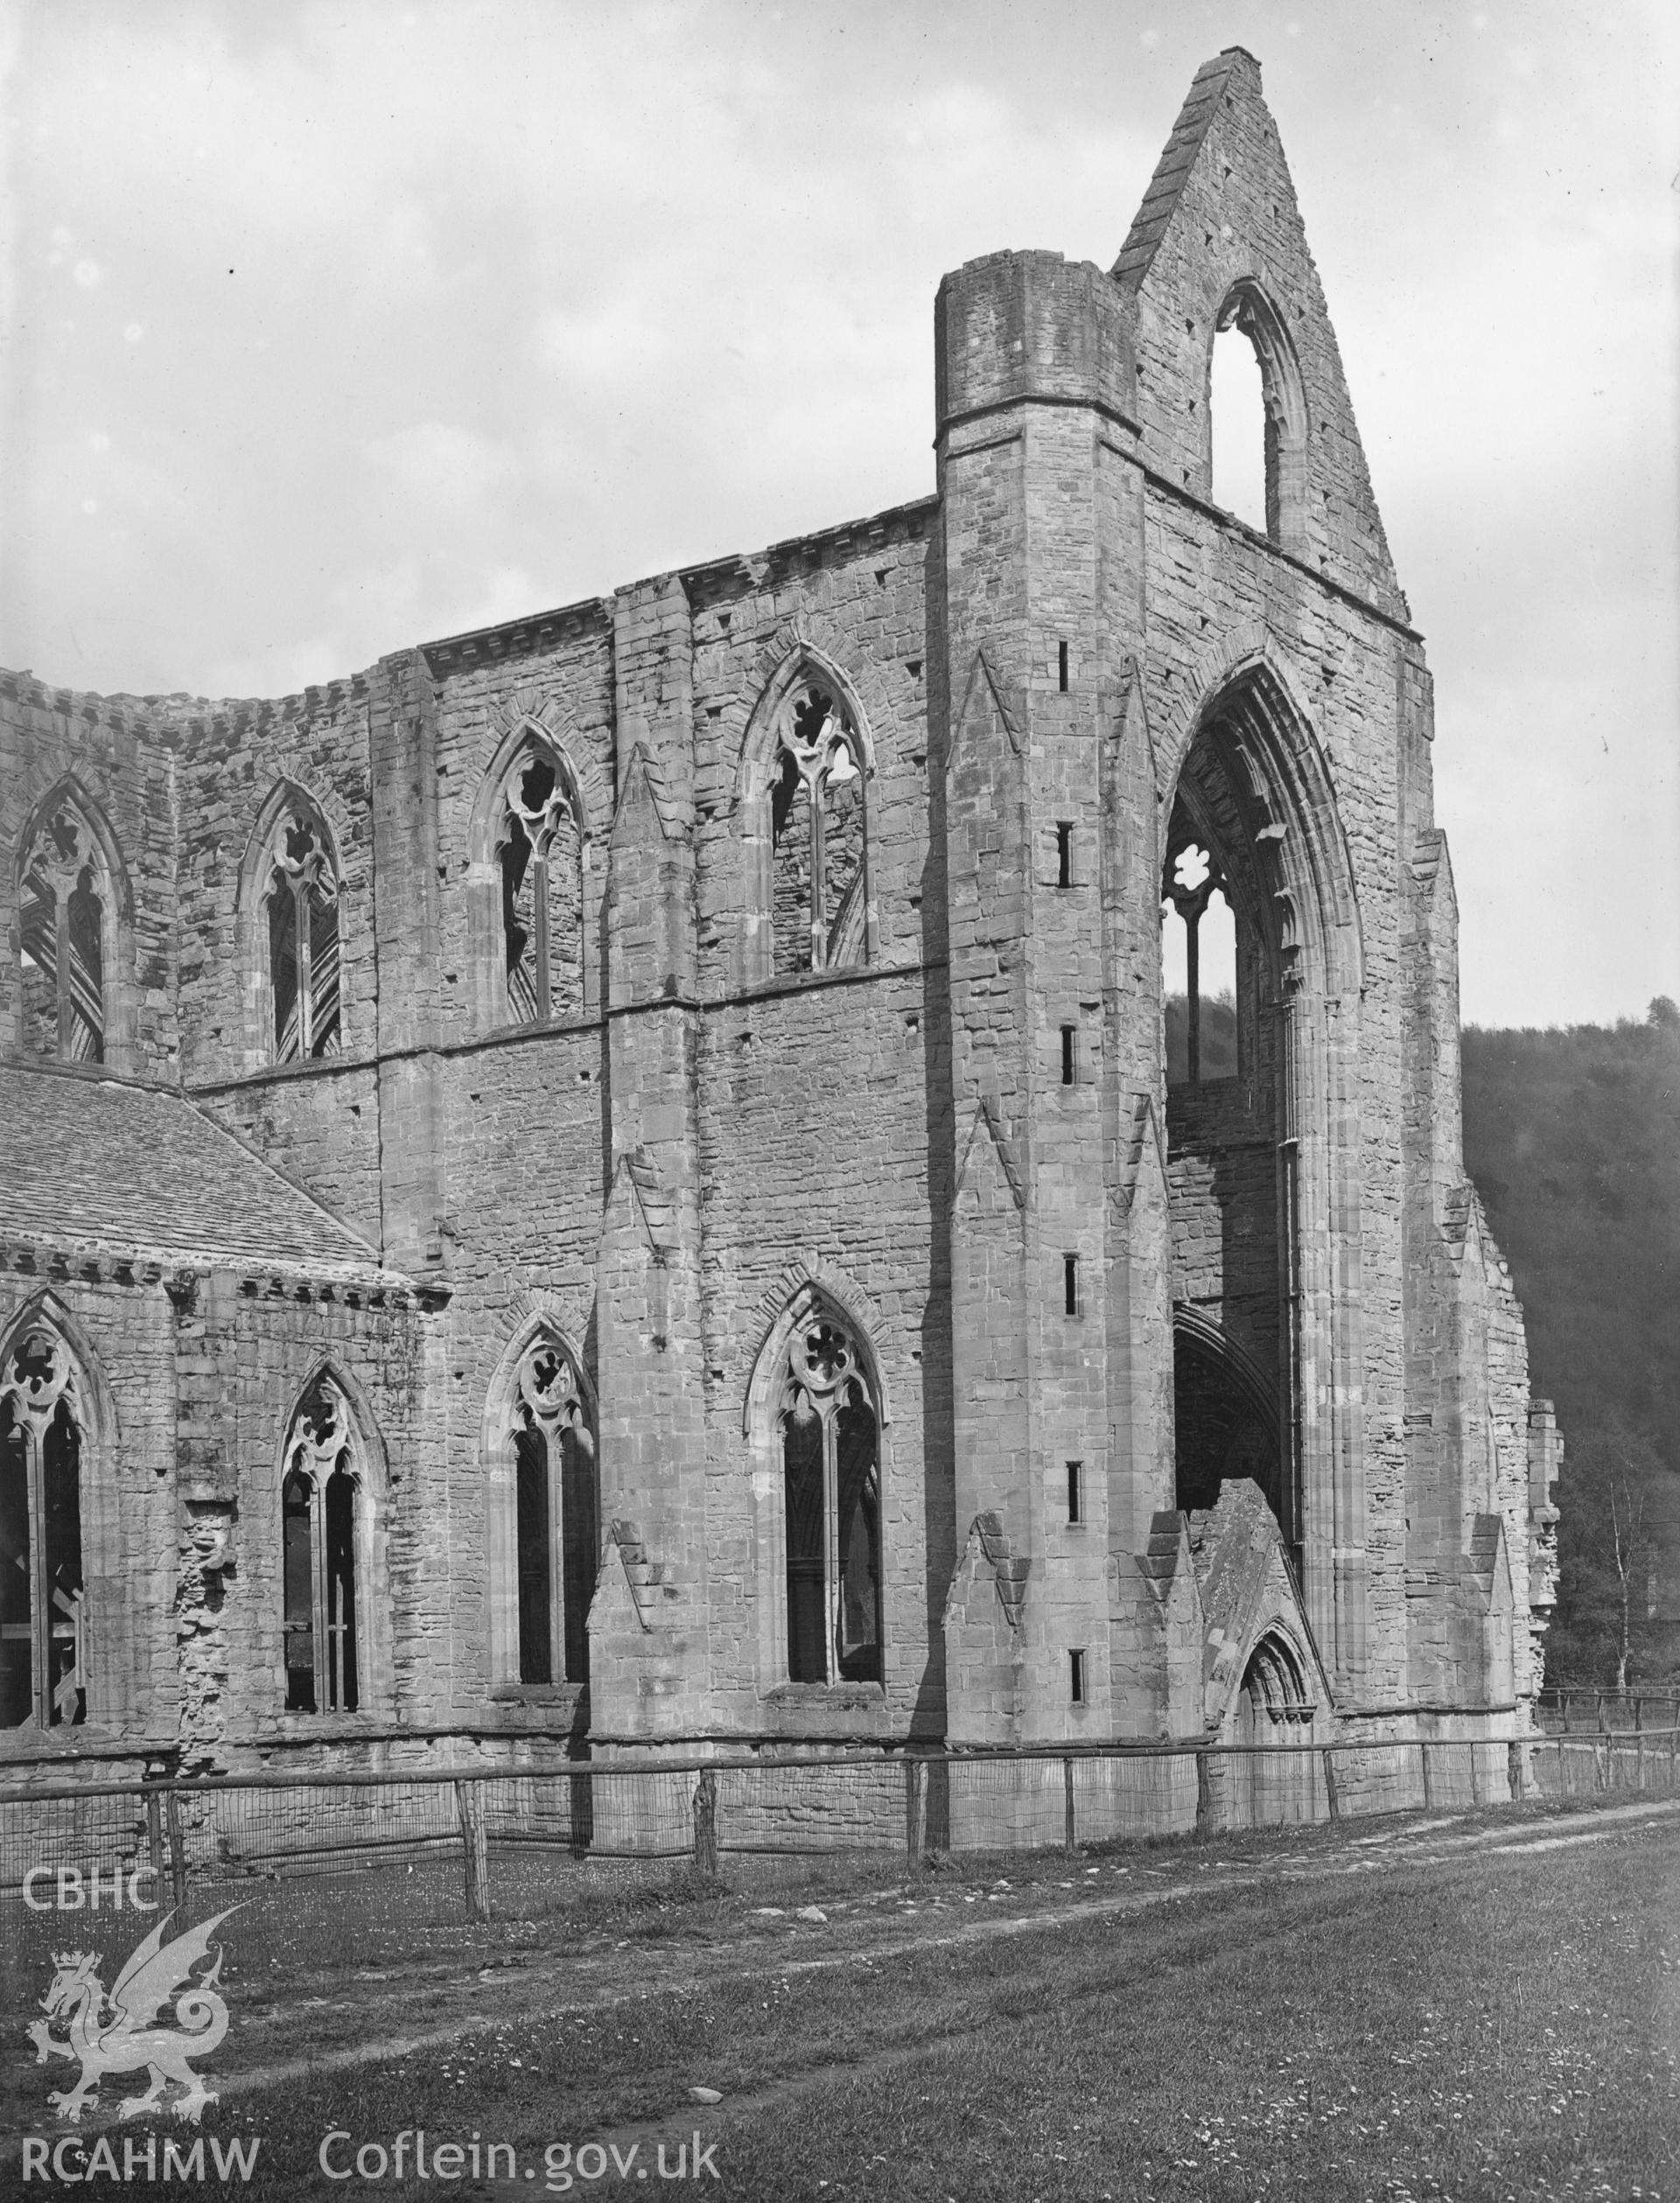 Digital copy of a photograph showing the south transept at Tintern Abbey taken by F H Crossley, c.1948.